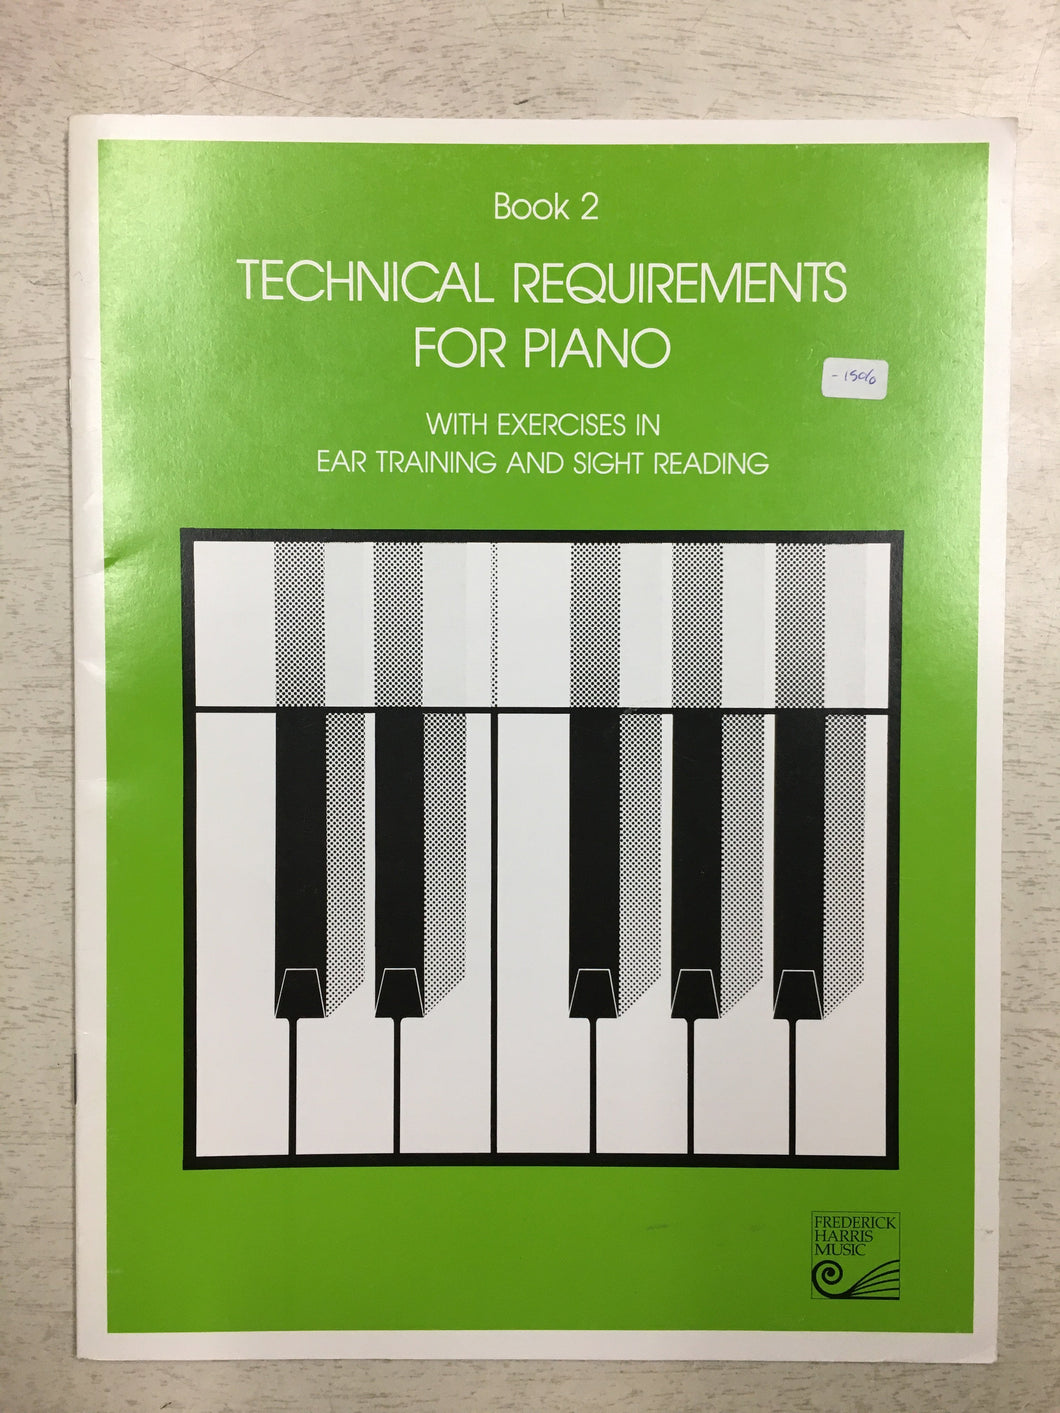 RCM Technical Requirements For Piano Grade 2 with Ear Training and Sight Reading Exercises (1984)